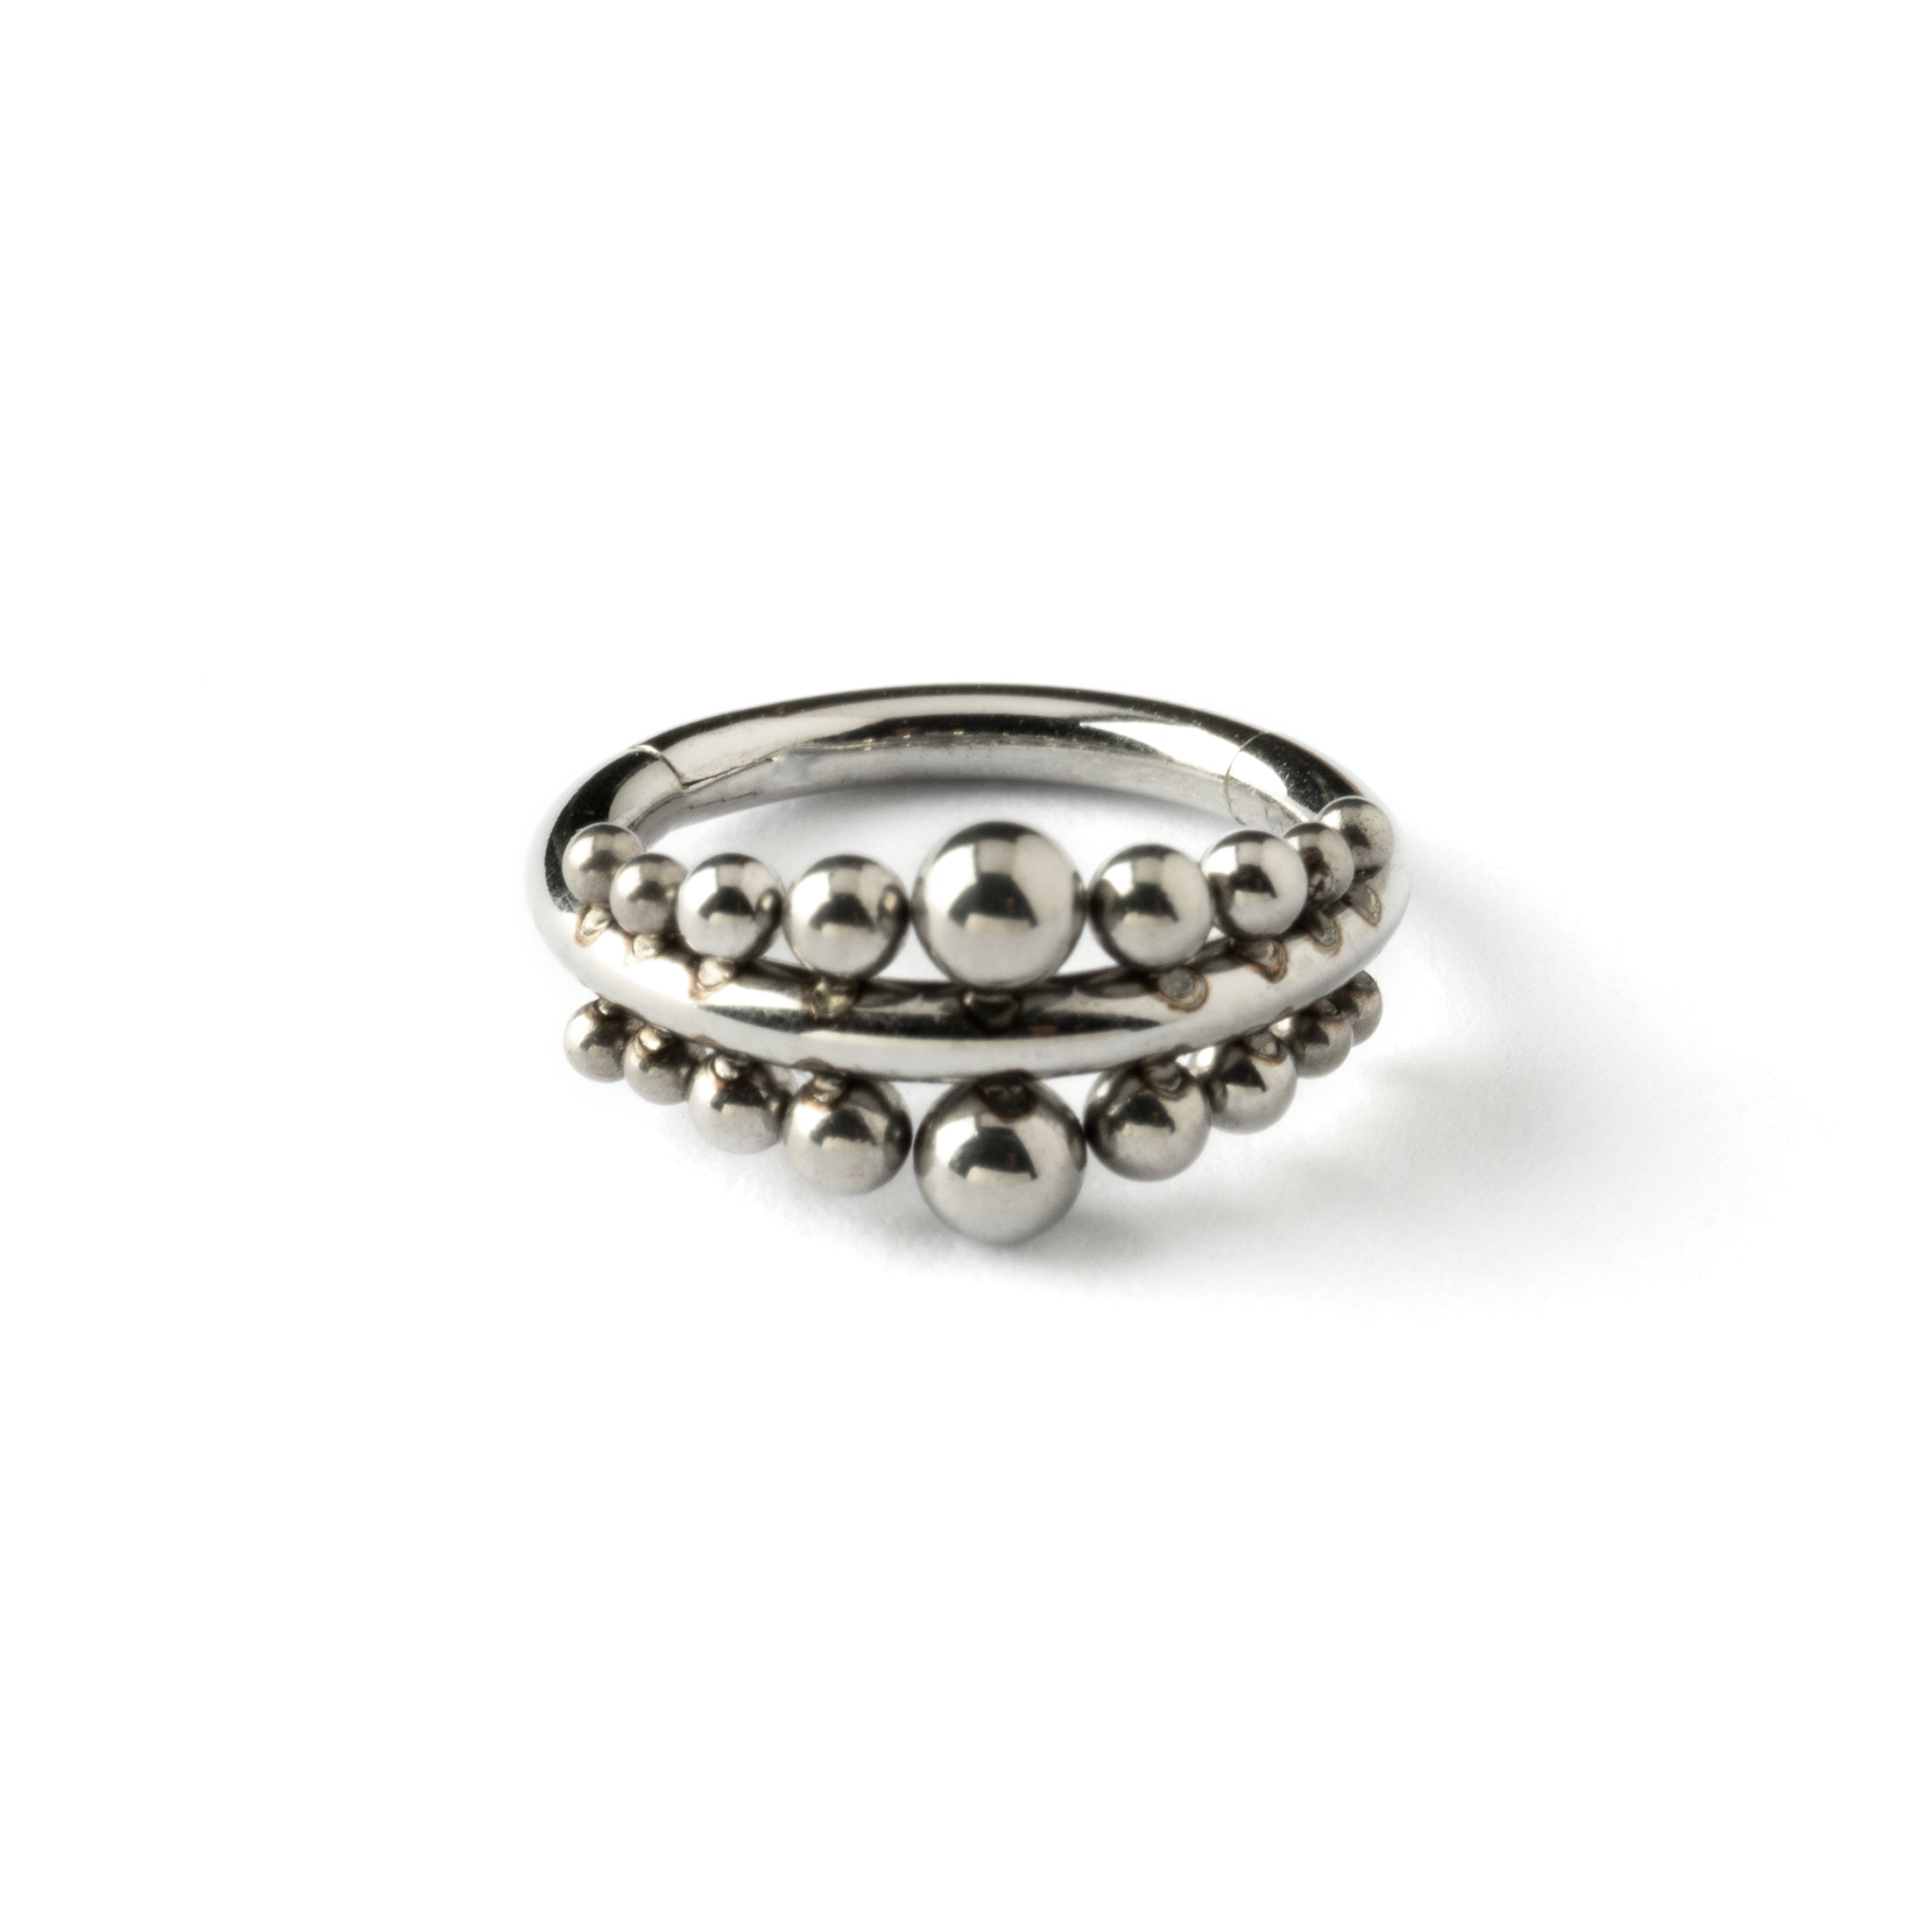 Somsak boho tribal surgical steel clicker piercing ring frontal view